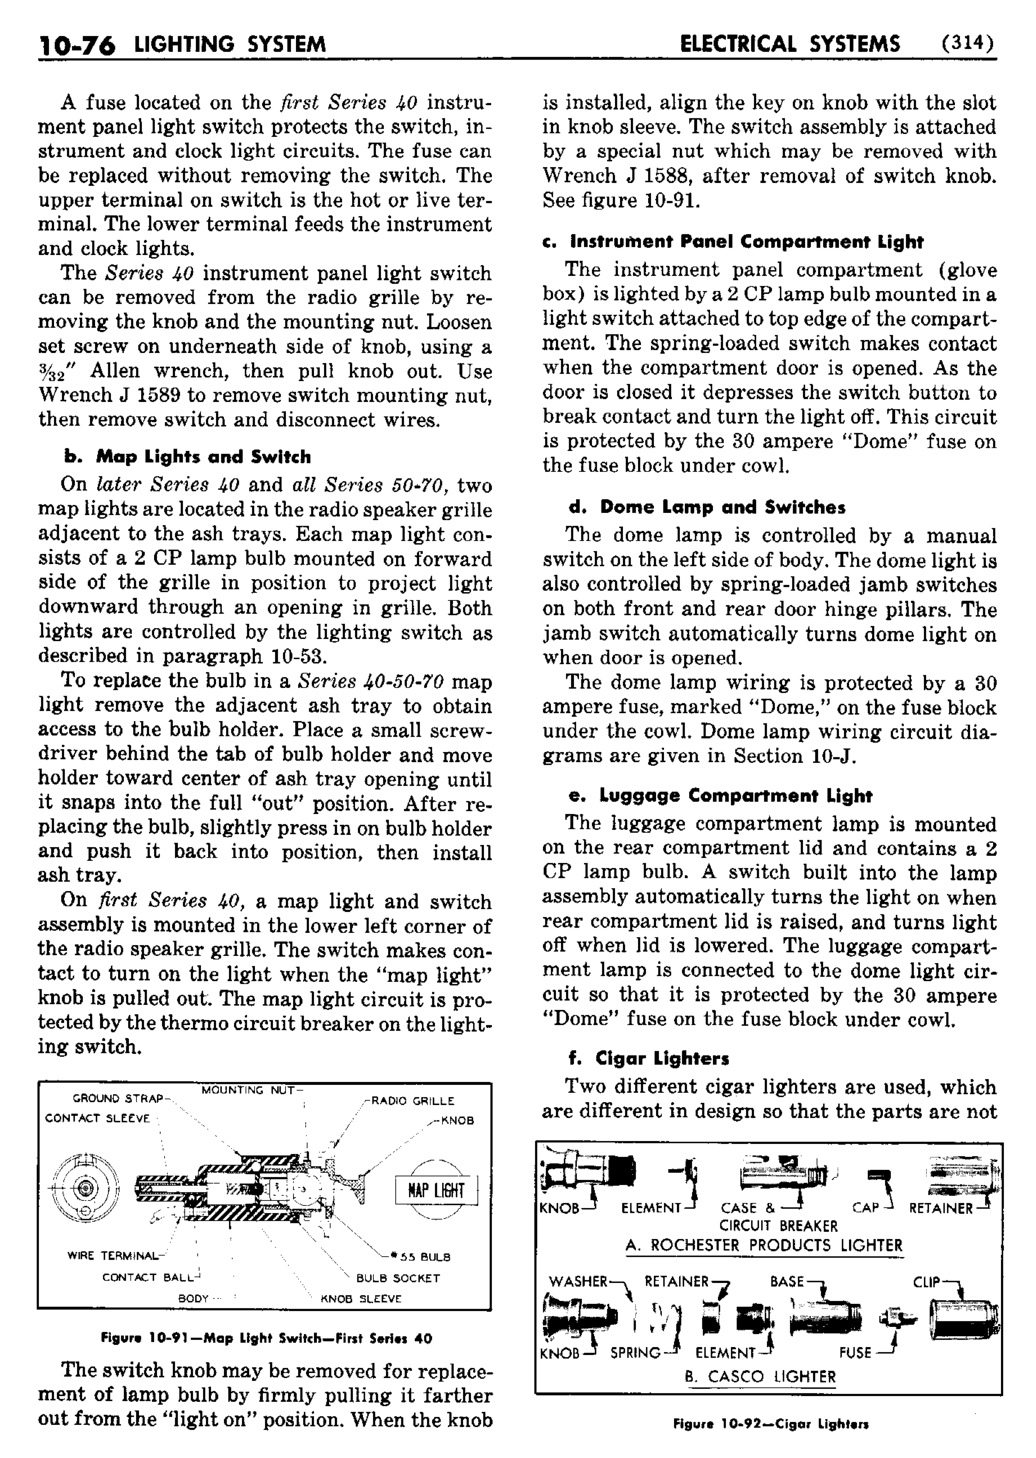 n_11 1950 Buick Shop Manual - Electrical Systems-076-076.jpg